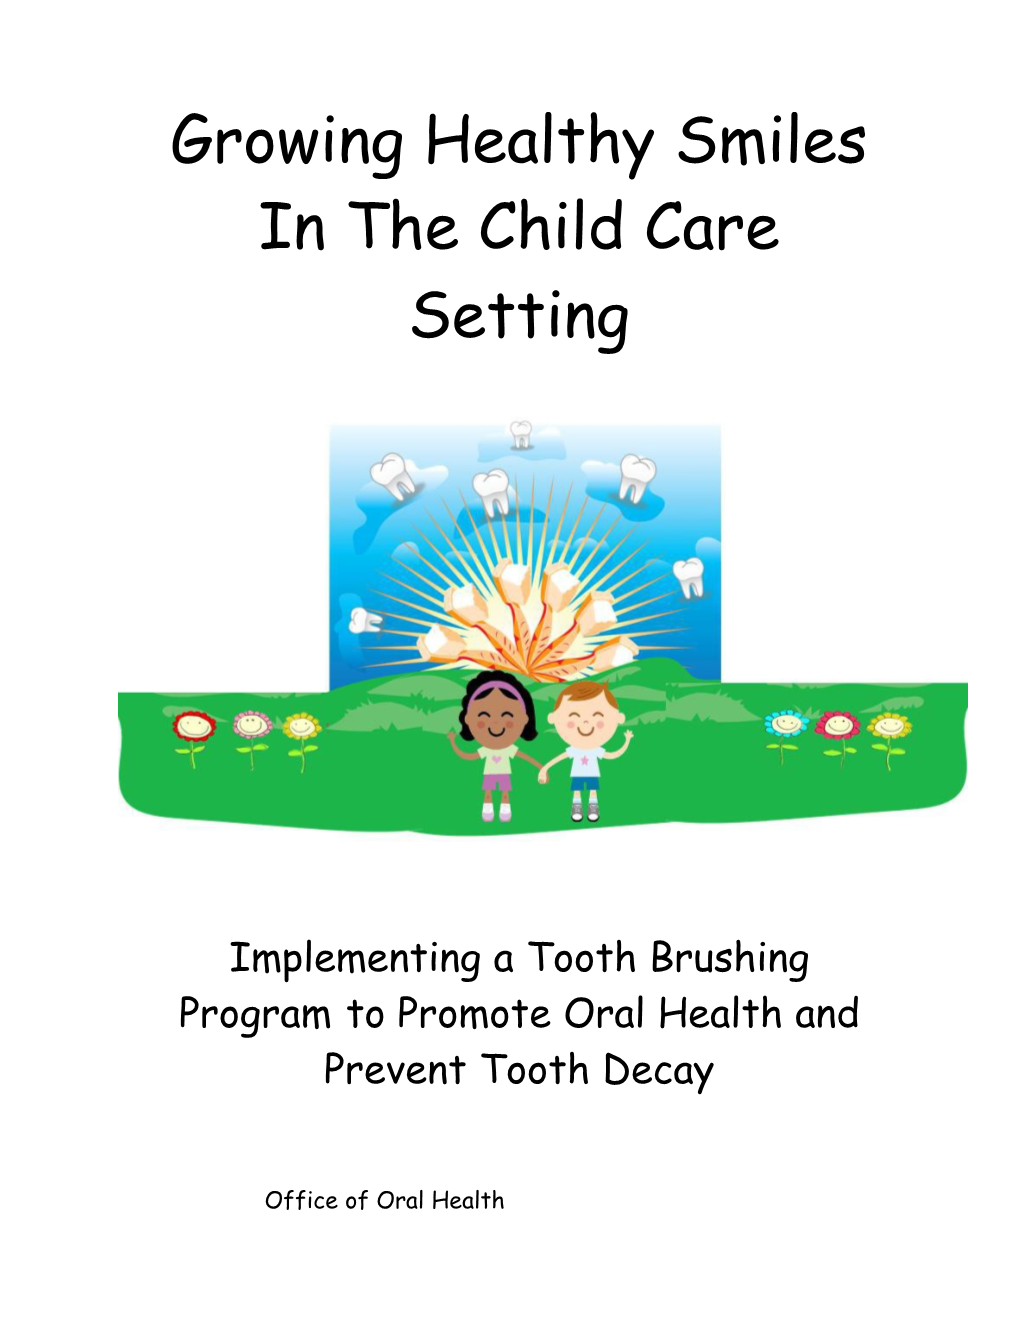 Oral Hygiene in the Childcare Setting